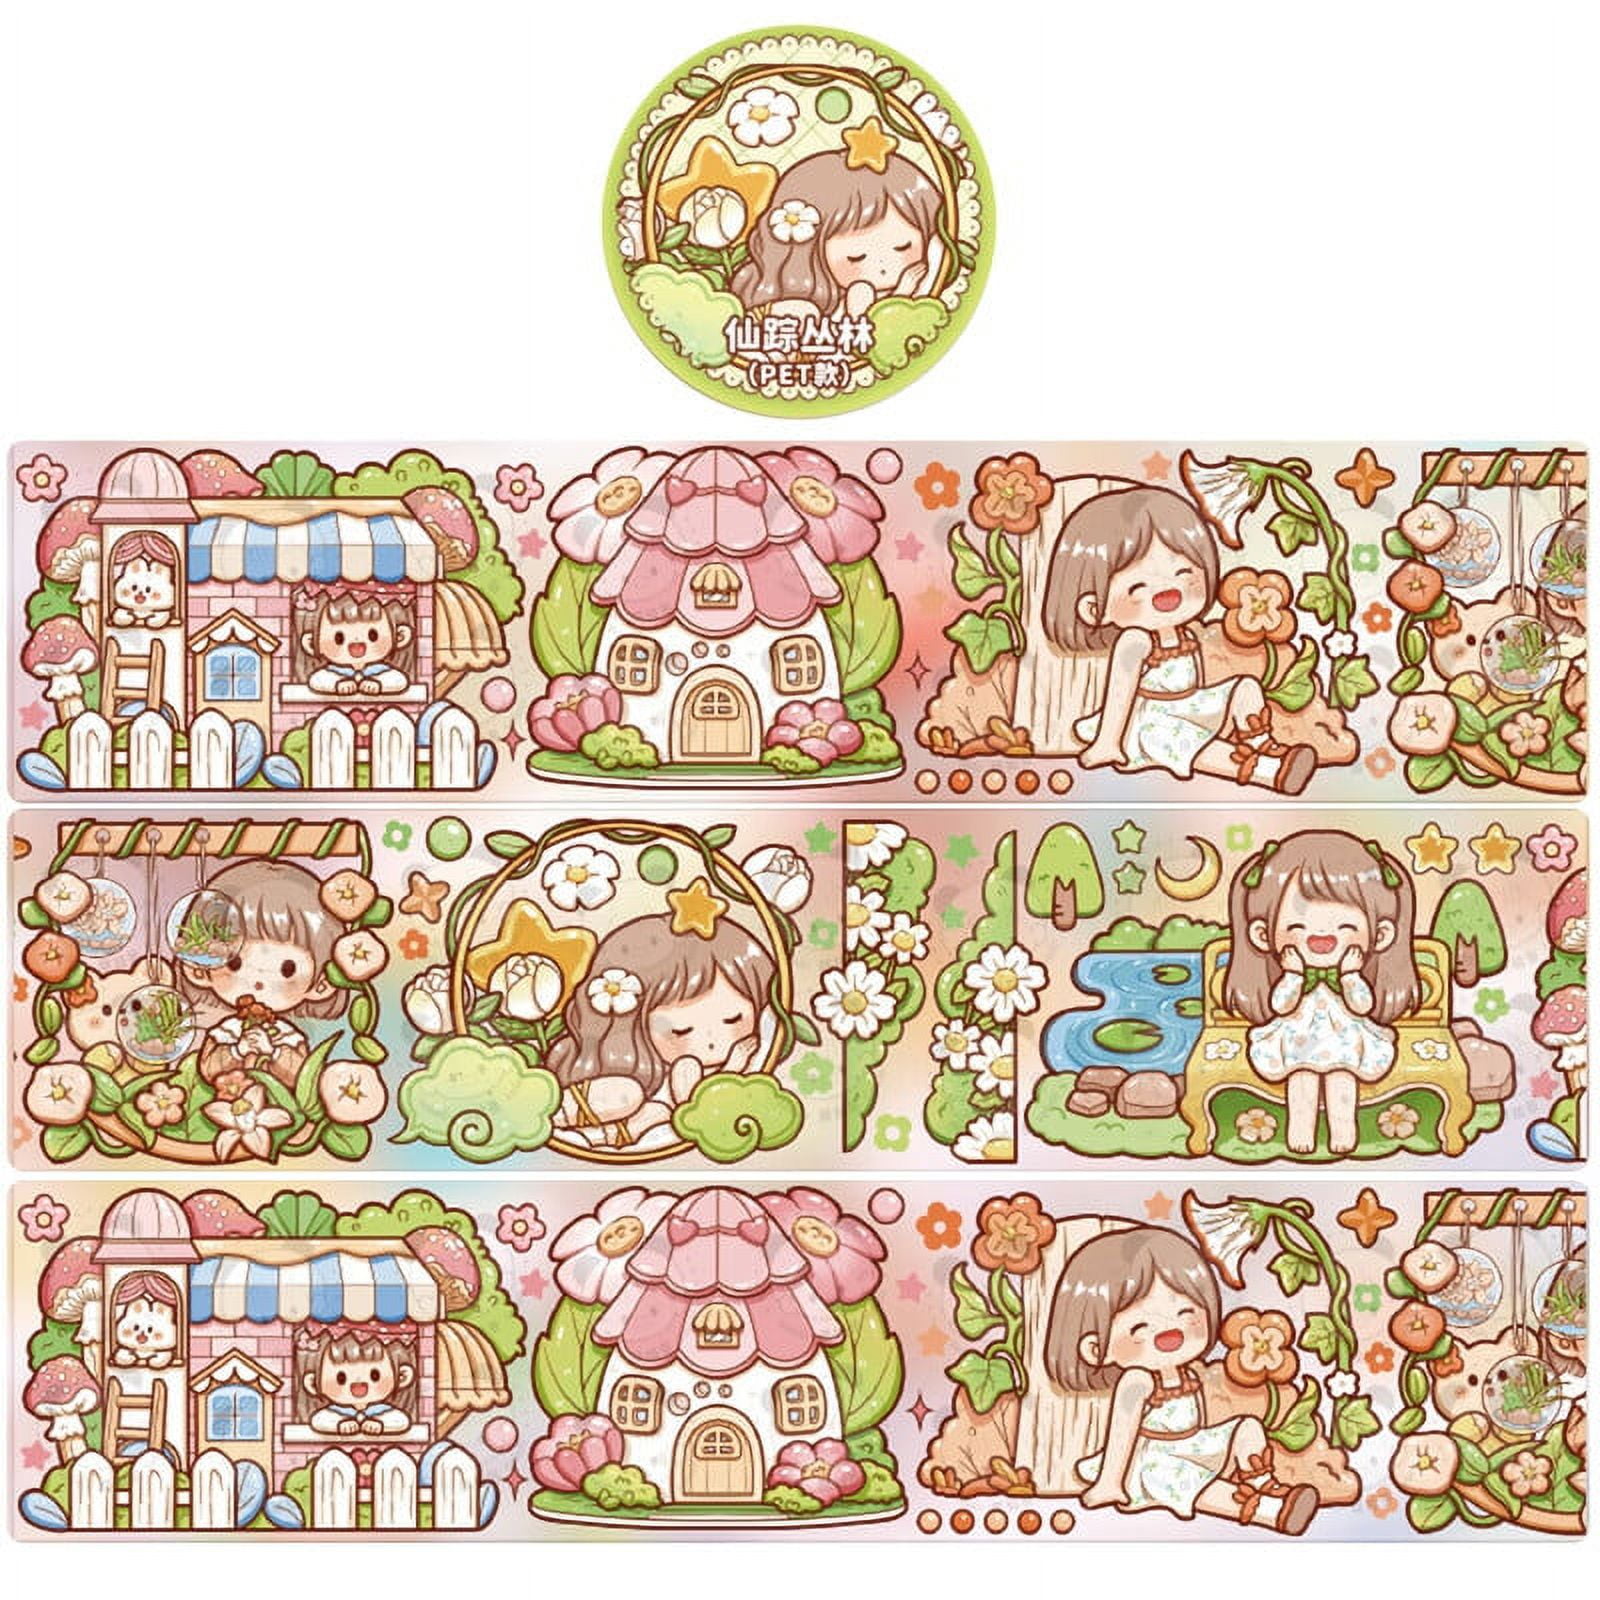 1pc Cute Cat Washi Tape 15mm X 5m Cartoon Paper Adhesive Marker Tapes Album  Diary Decoration